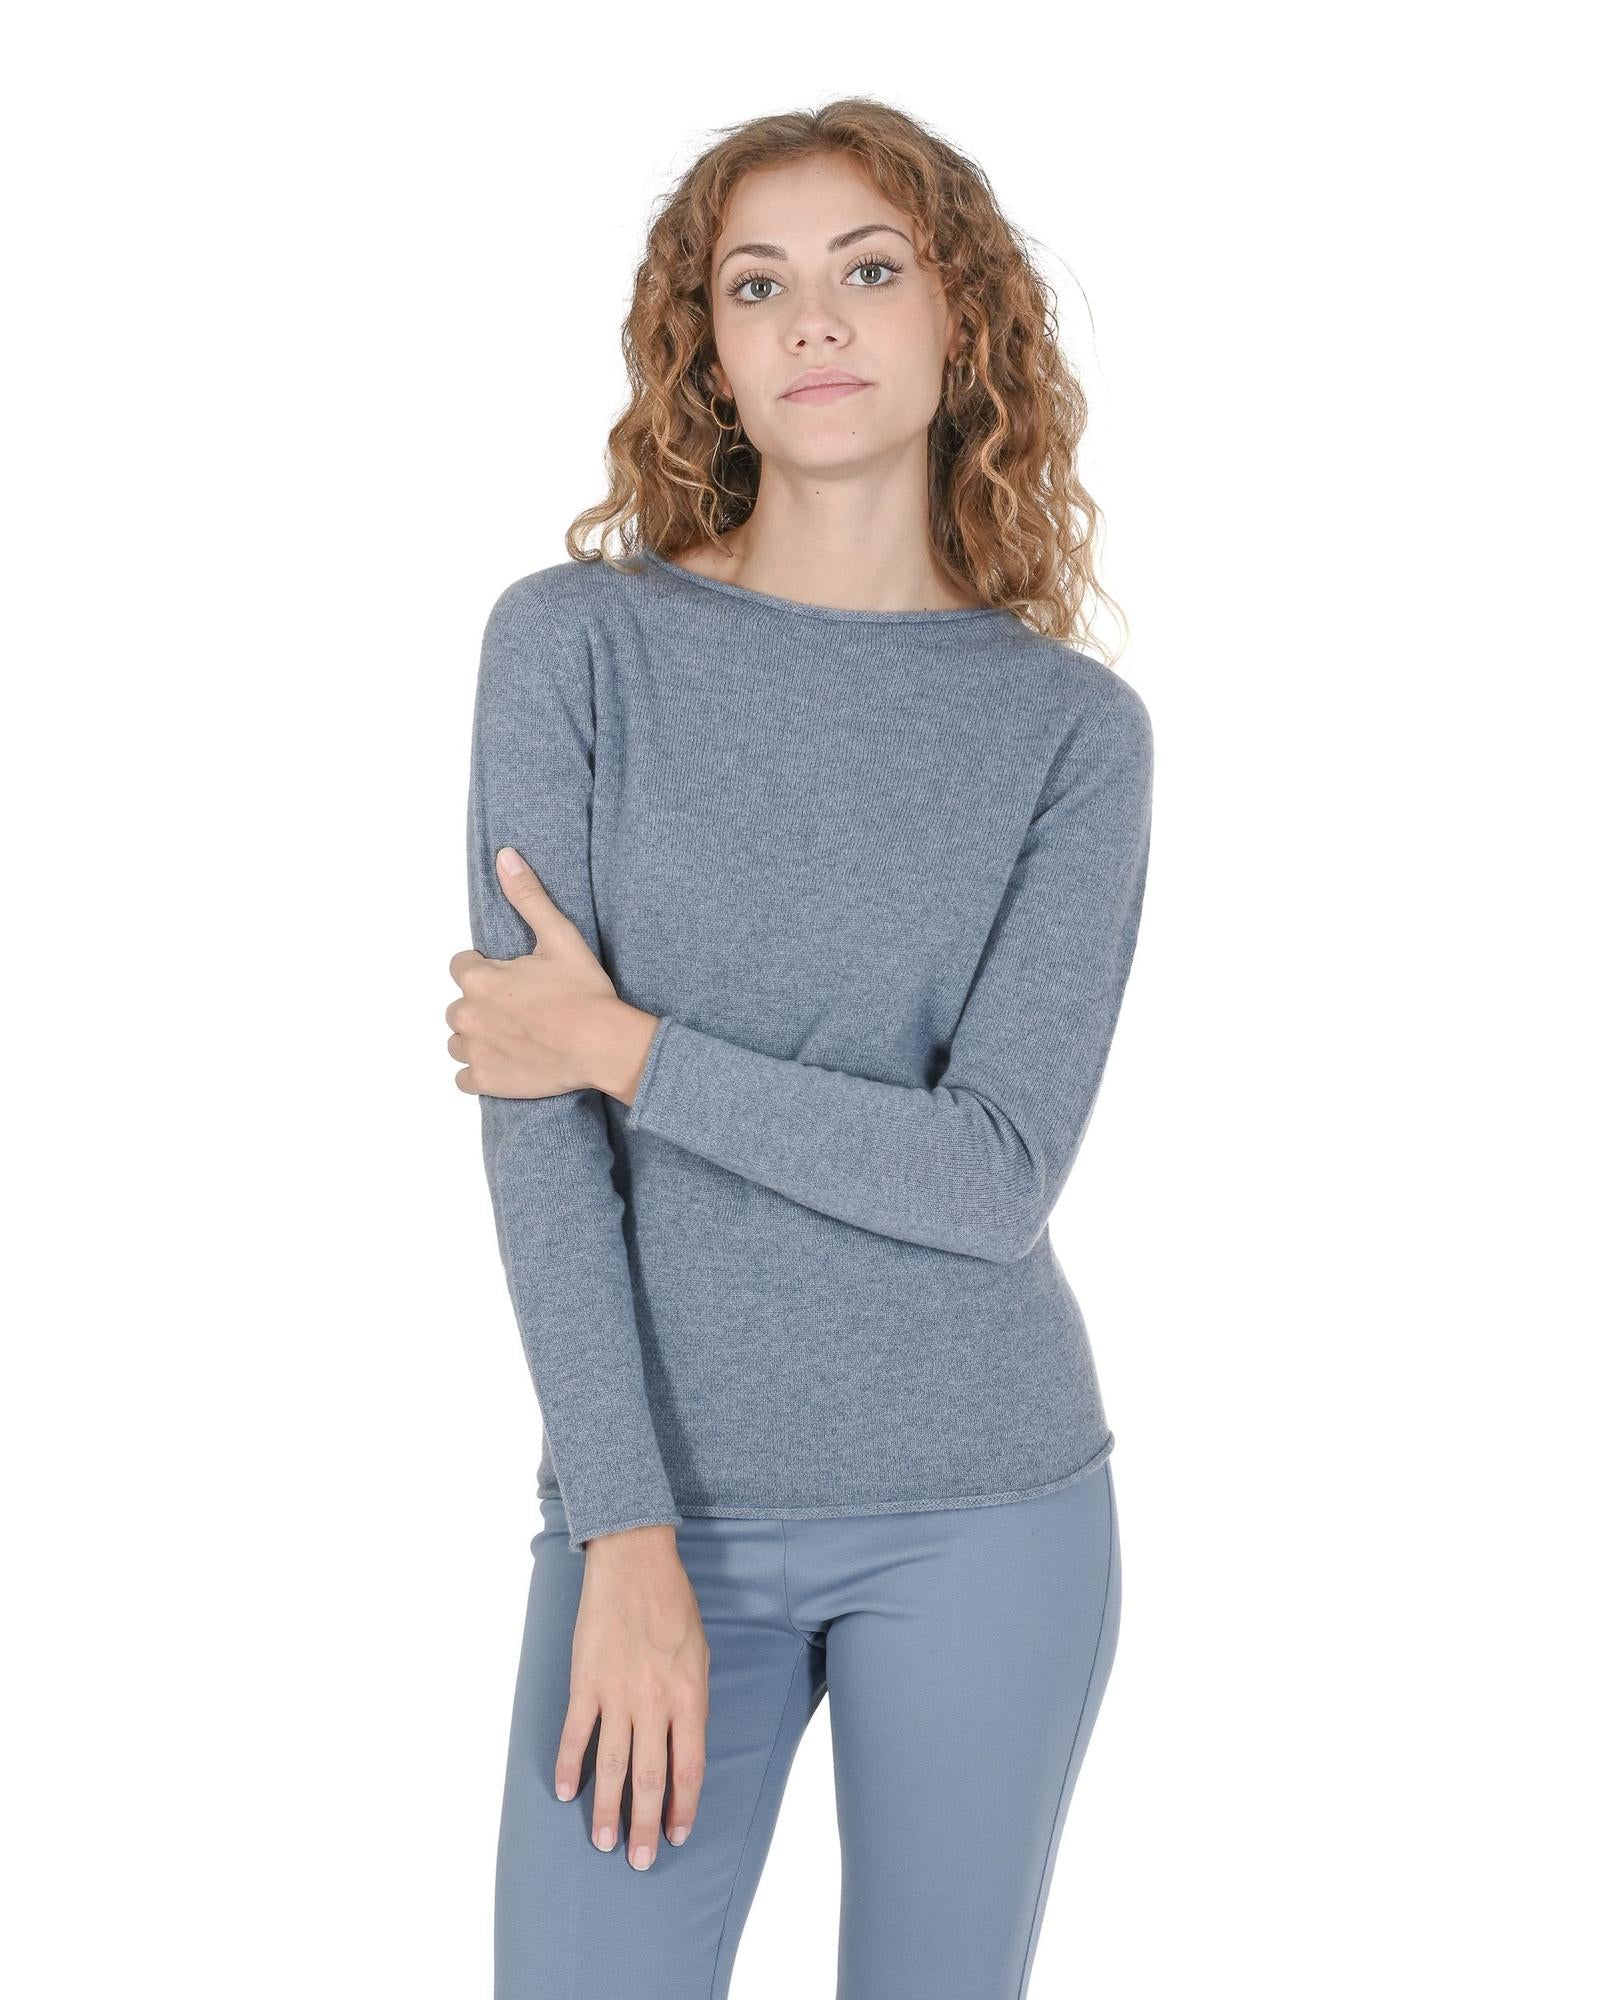 Crown of Edinburgh Cashmere Women's Cashmere Boatneck Sweater - Italian Crafted in Sky blue - S